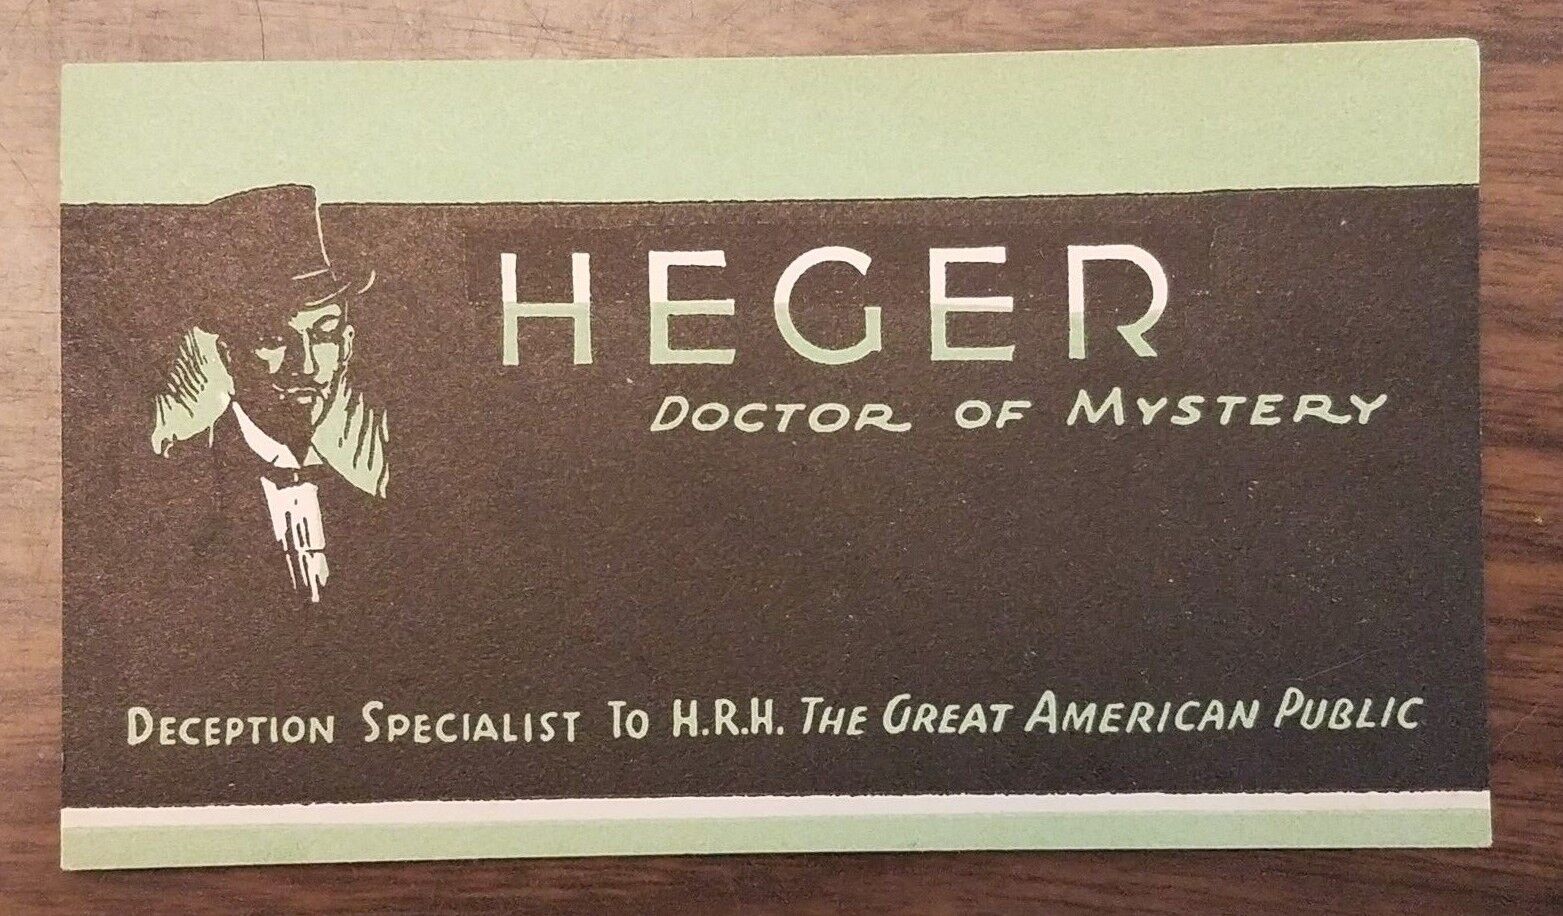 VERY RARE Vintage Business Card Heger Doctor of Mystery Deception Specialist 